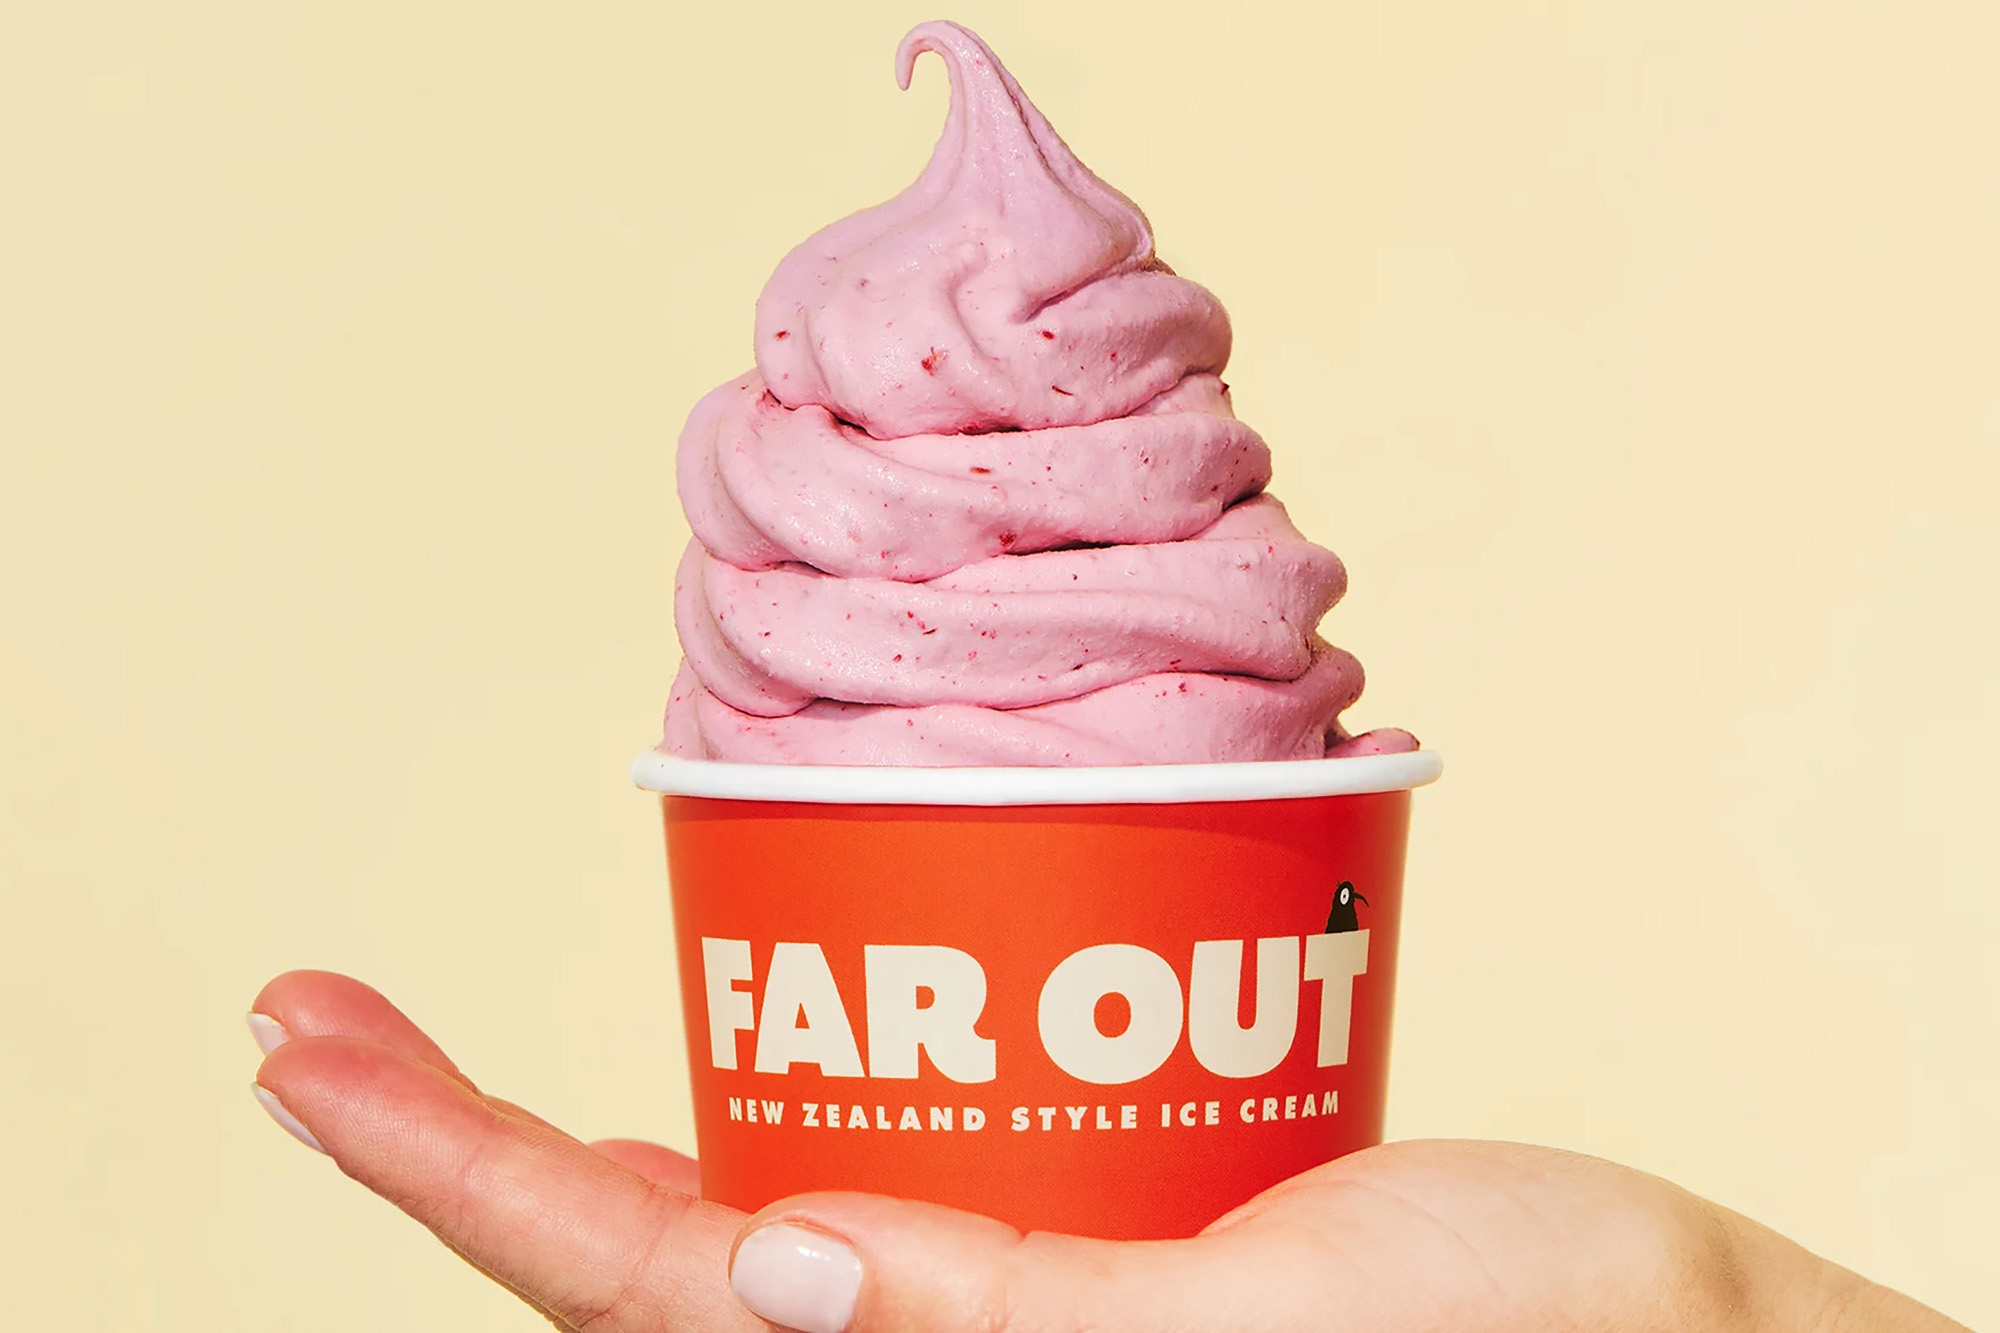 Photo: A white hand holds a red cup with pink swirled ice cream in front of a pale yellow background.